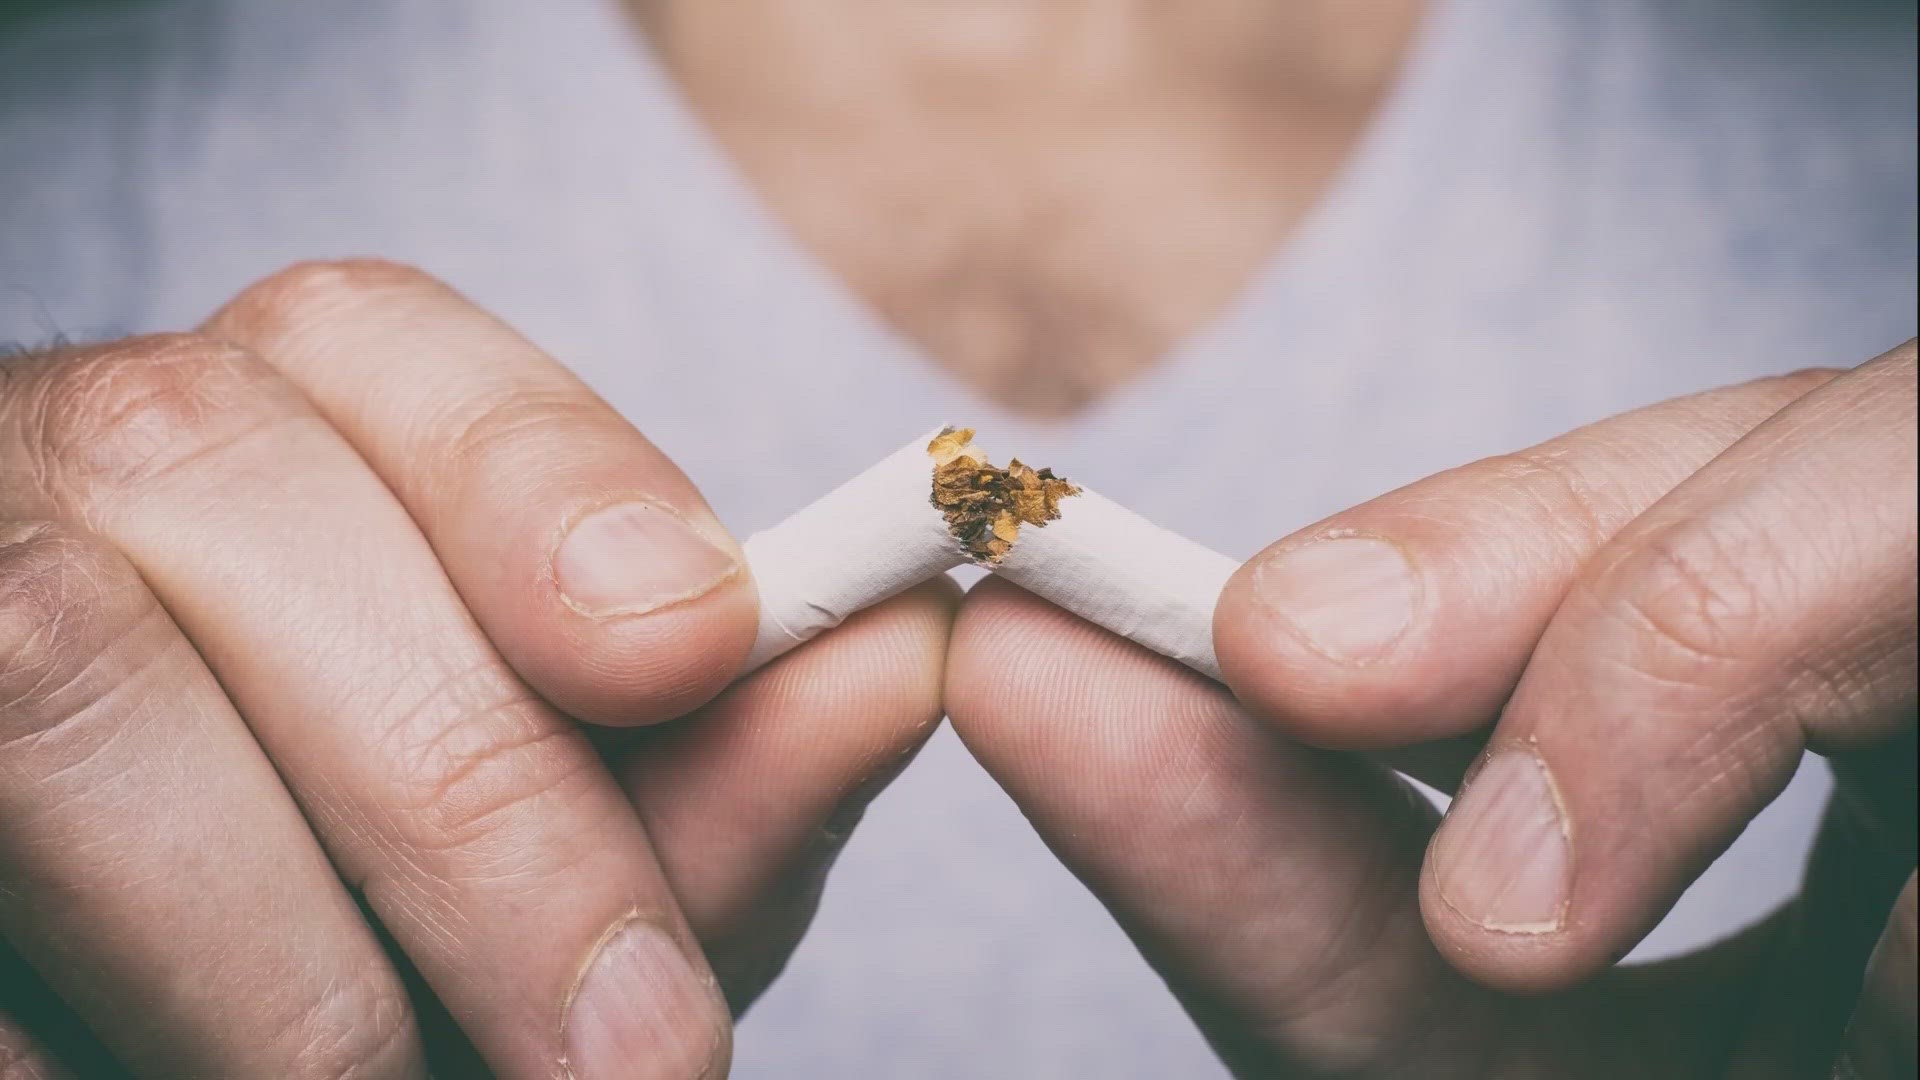 Fred Hutch Cancer Center launched its app, called QuitBot, to help smokers kick the habit.